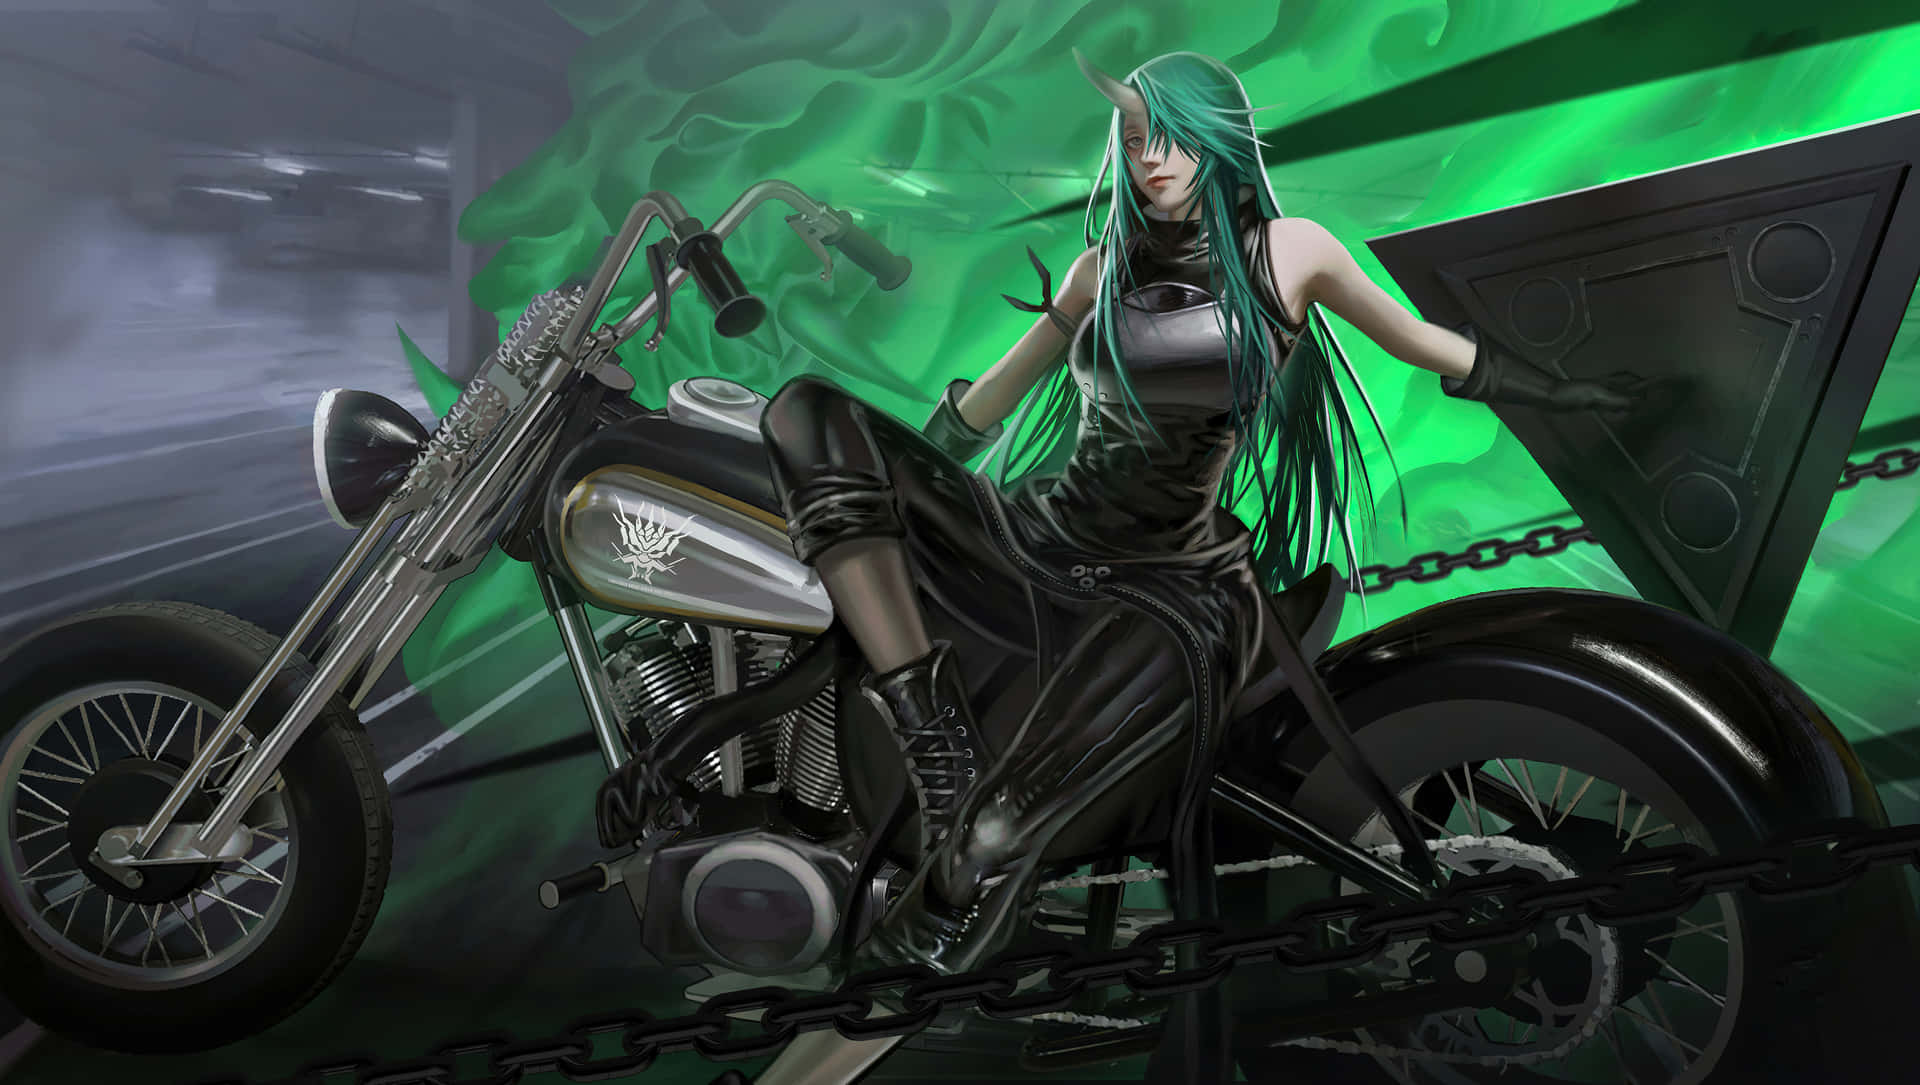 A Girl On A Motorcycle With Green Hair Wallpaper